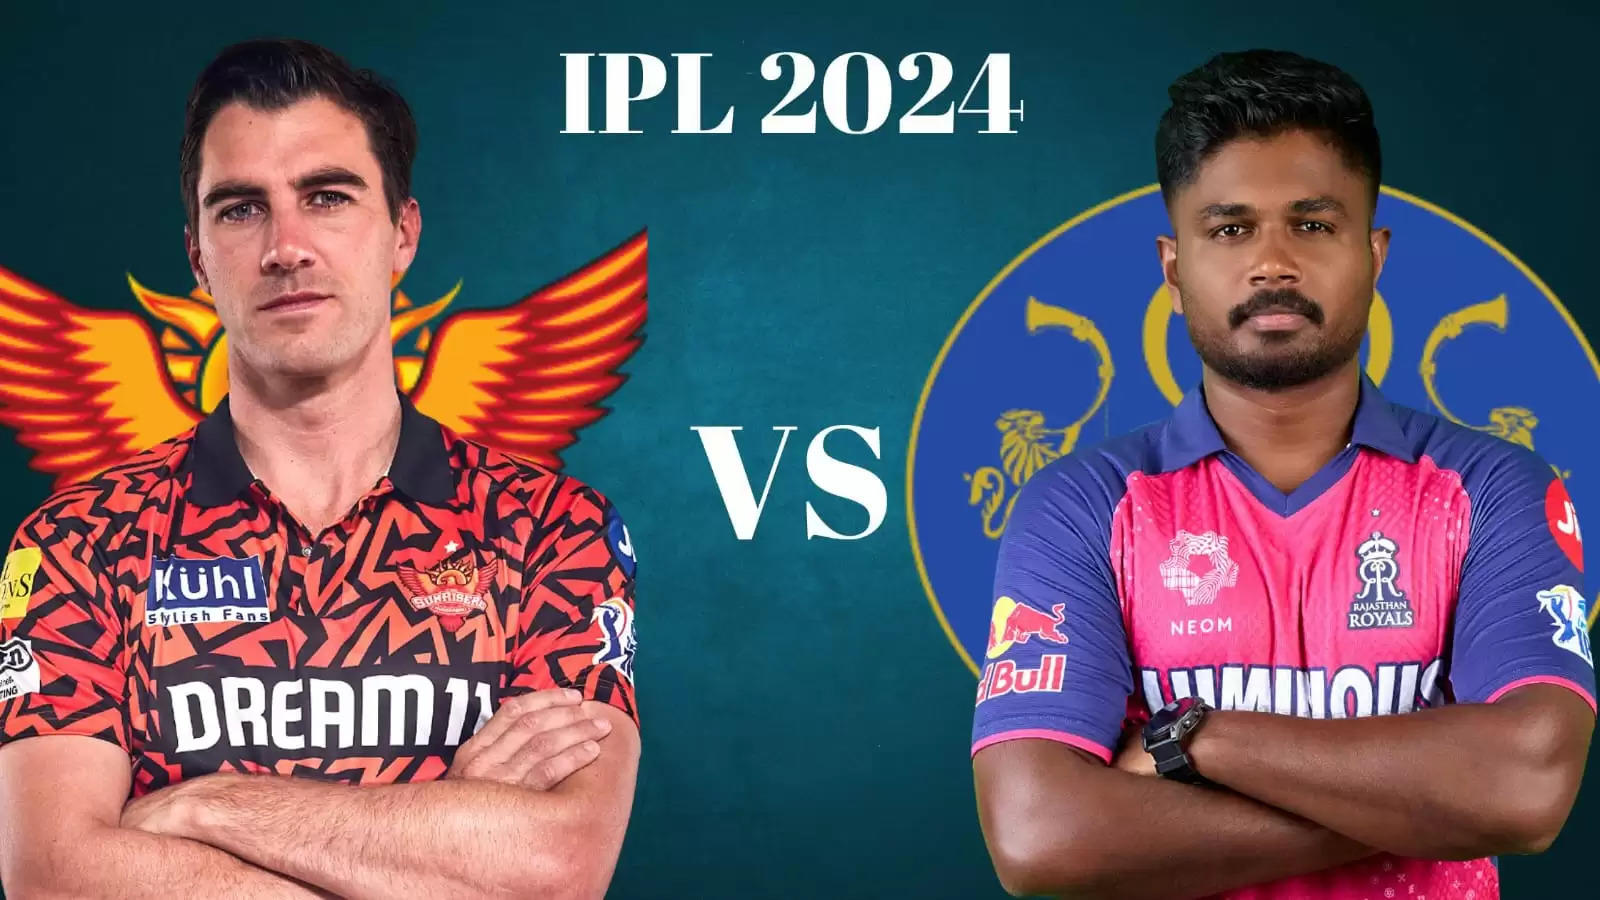 SRH vs RR Dream11 Prediction Today Match 50: Playing XI, IPL 2024 Fantasy Cricket Tips, Sunrisers Hyderabad vs Rajasthan Royals Dream11 Team, Weather and Pitch Report, Injury Updates and Team News